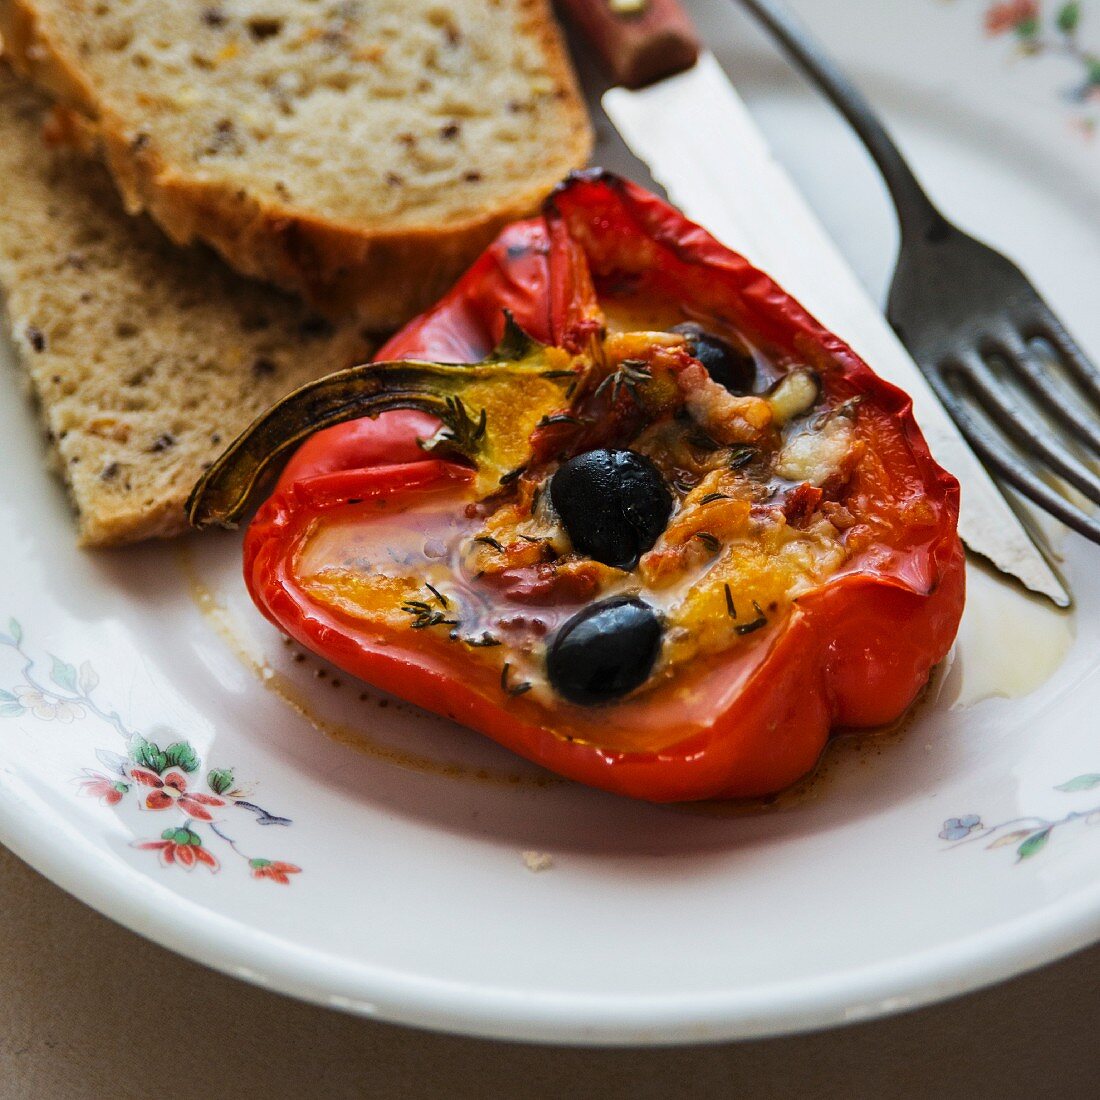 A pepper filled with olives and feta cheese